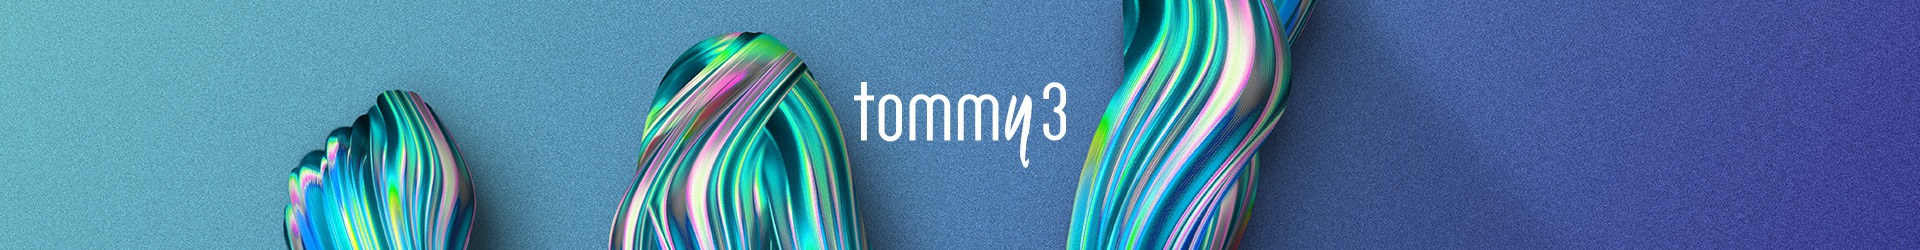 Smartphone Tommy3